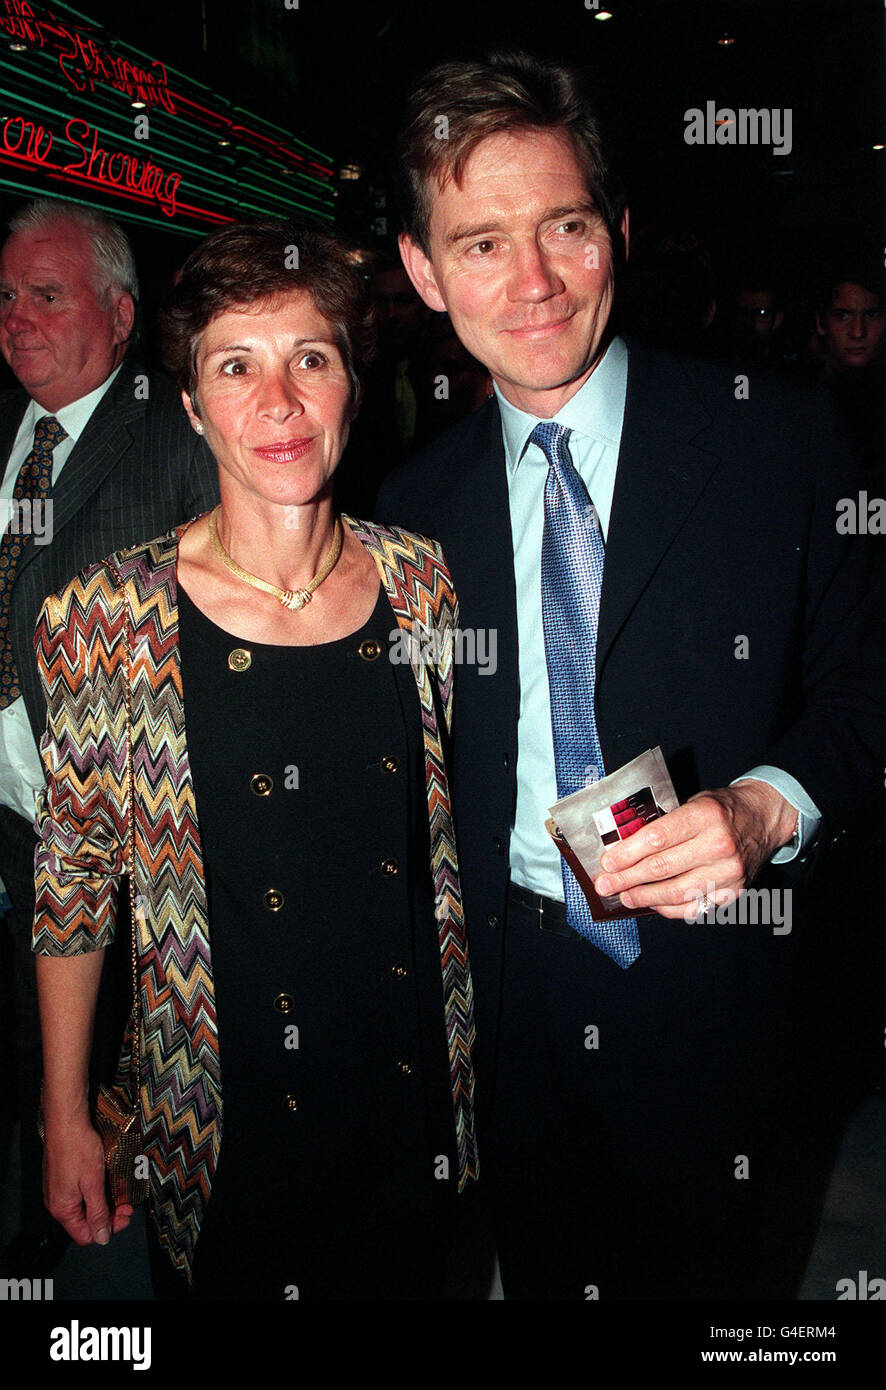 ACTOR ANTHONY ANDREWS AND HIS WIFE GEORGINA AT THE UK PREMIERE OF STEVEN SPIELBERG'S LATEST FILM 'SAVING PRIVATE RYAN' AT THE EMPIRE IN LONDON'S LEICESTER SQUARE. Stock Photo